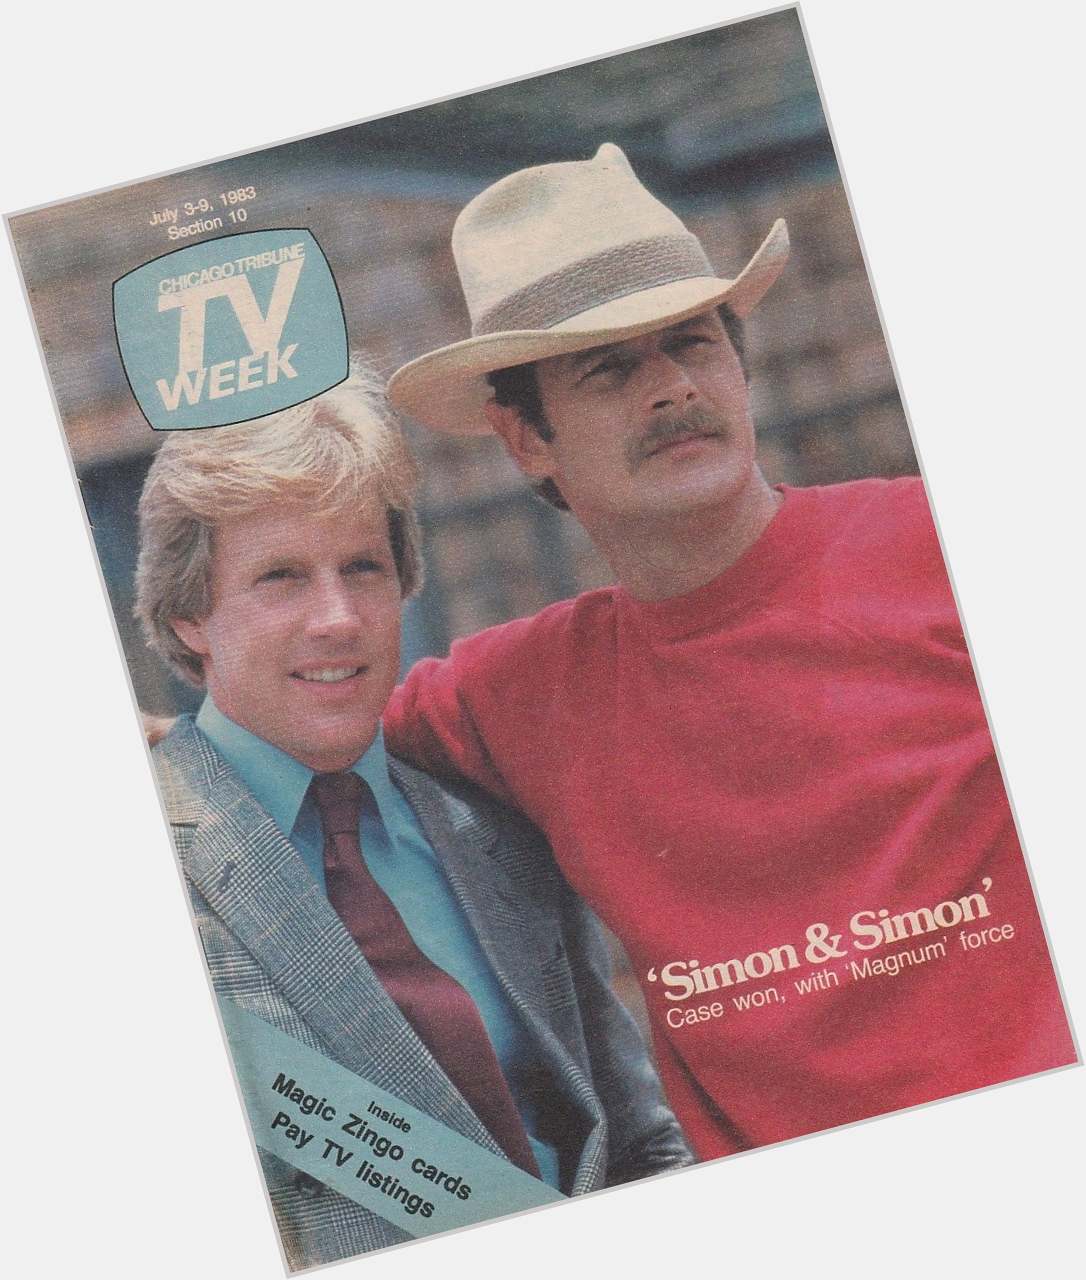 Happy Birthday to Gerald McRaney, born on this date in 1947
Chicago Tribune TV Week.  July 3-9, 1983 